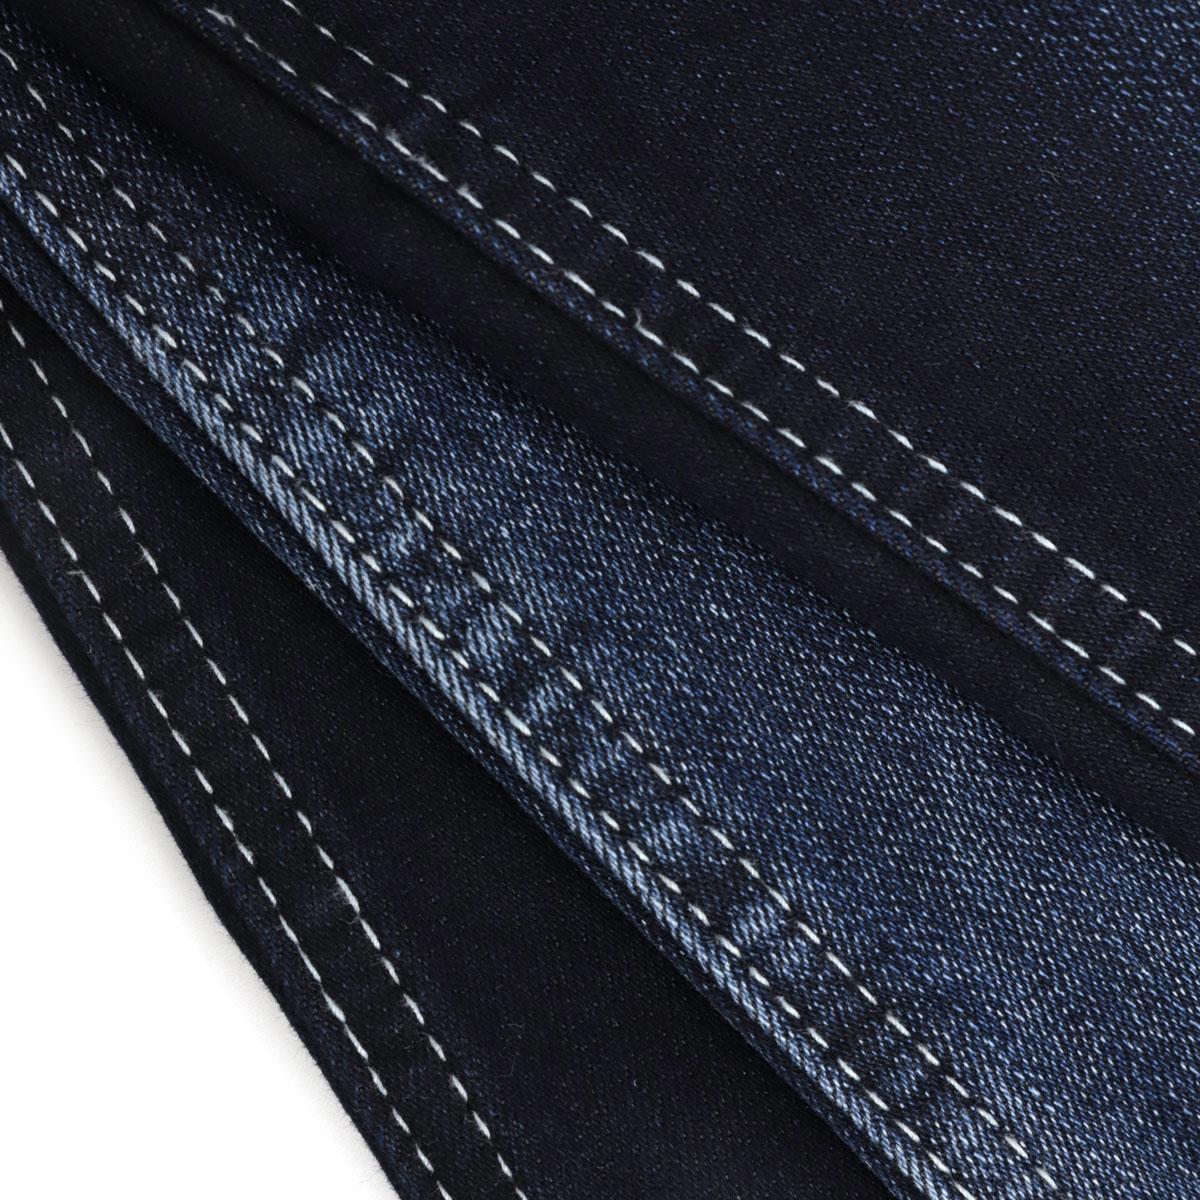 163A-6 Fashion Style Woven Indigo Jeans Fabric For Women Pants with fleece to keep warm in winter